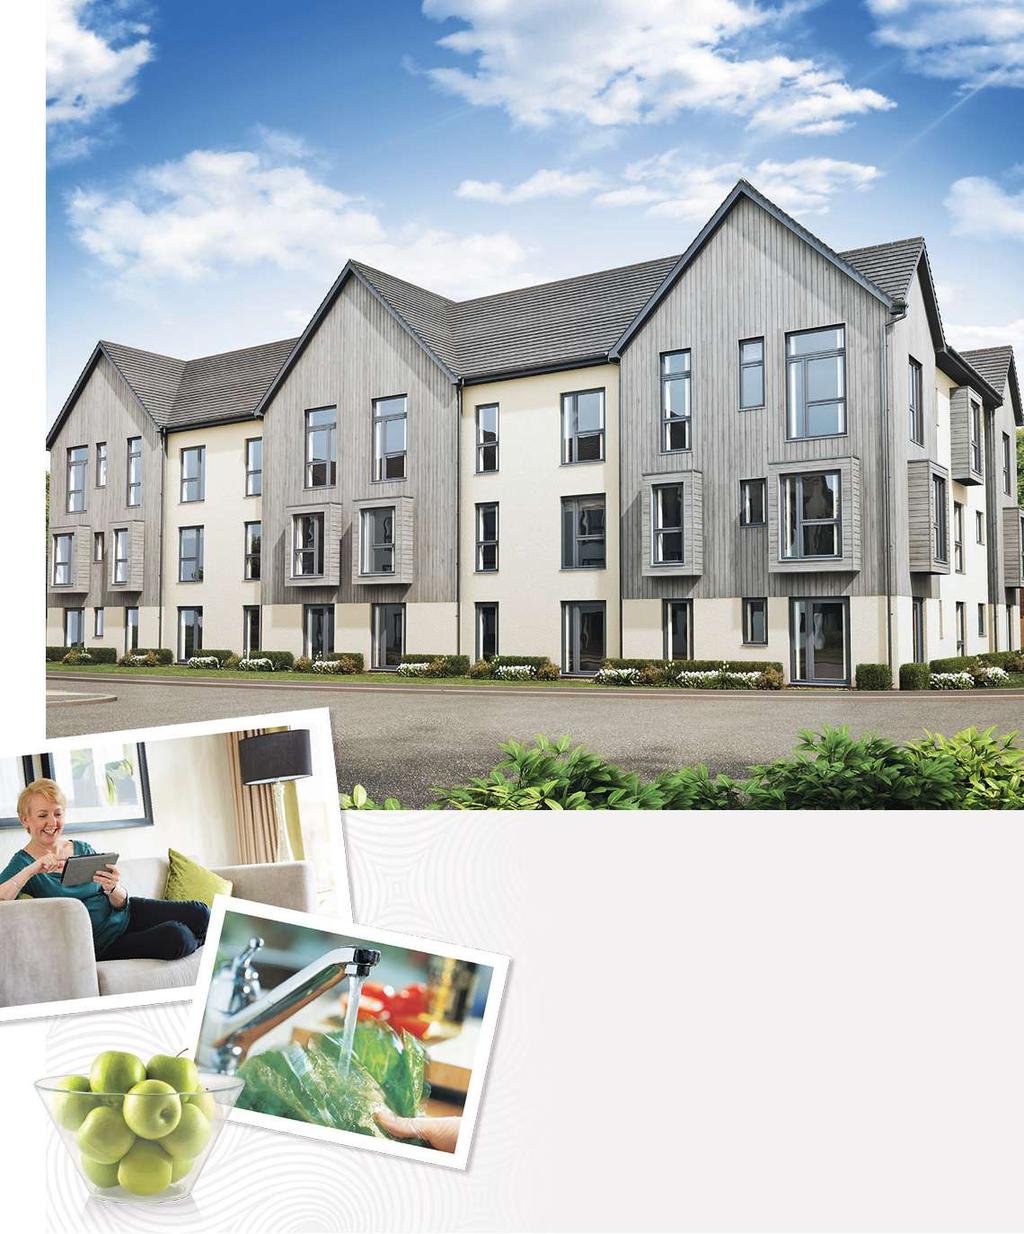 LATITUDE @ THE QUAYS North House 2 bedroom apartments This elegant 3 storey block features a selection of two bedroom apartments in a choice of different layouts.